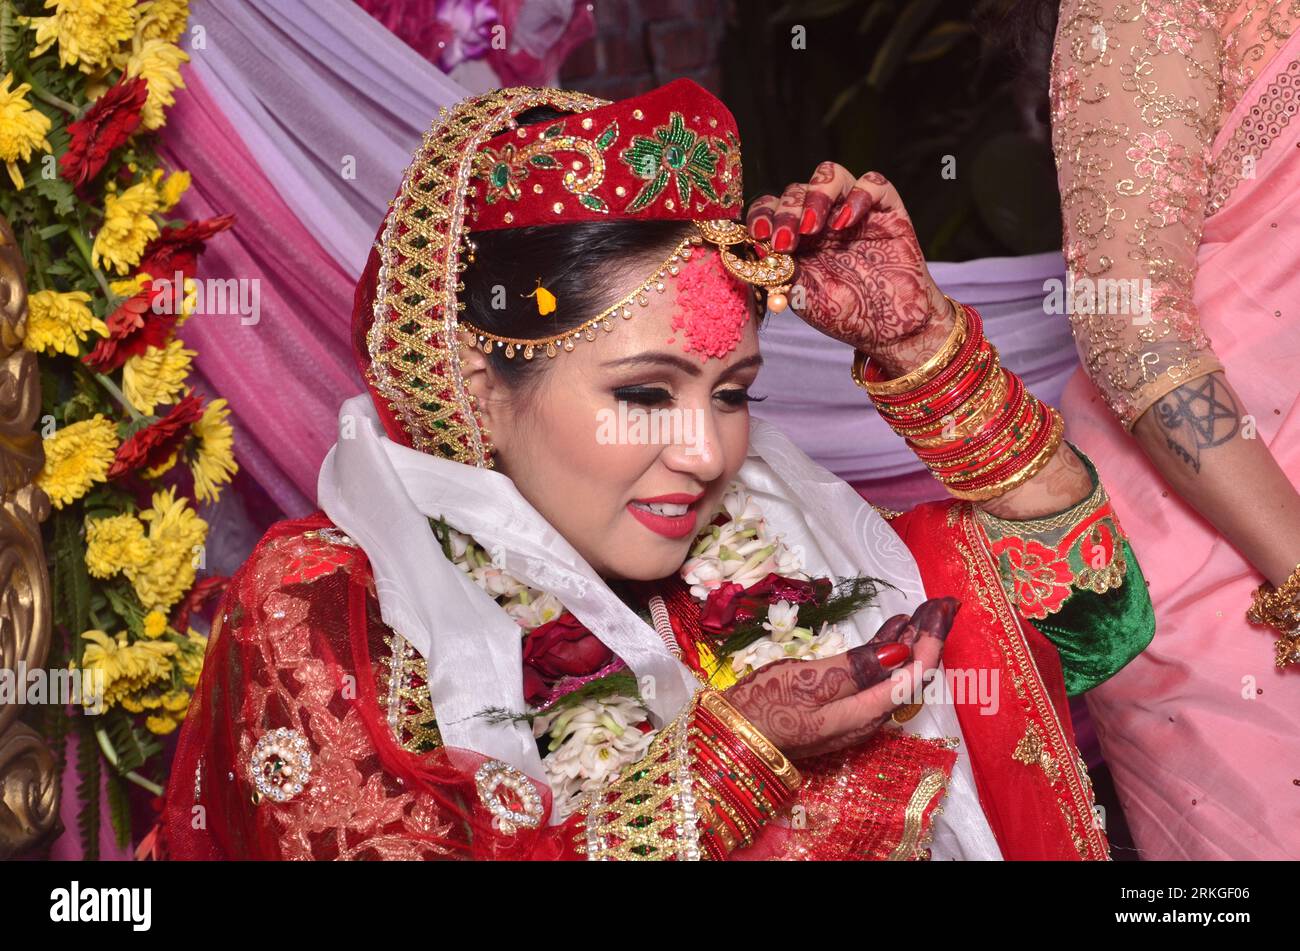 A happy smiling Nepali bride iwearing a red saree and gold jewelry. Stock Photo